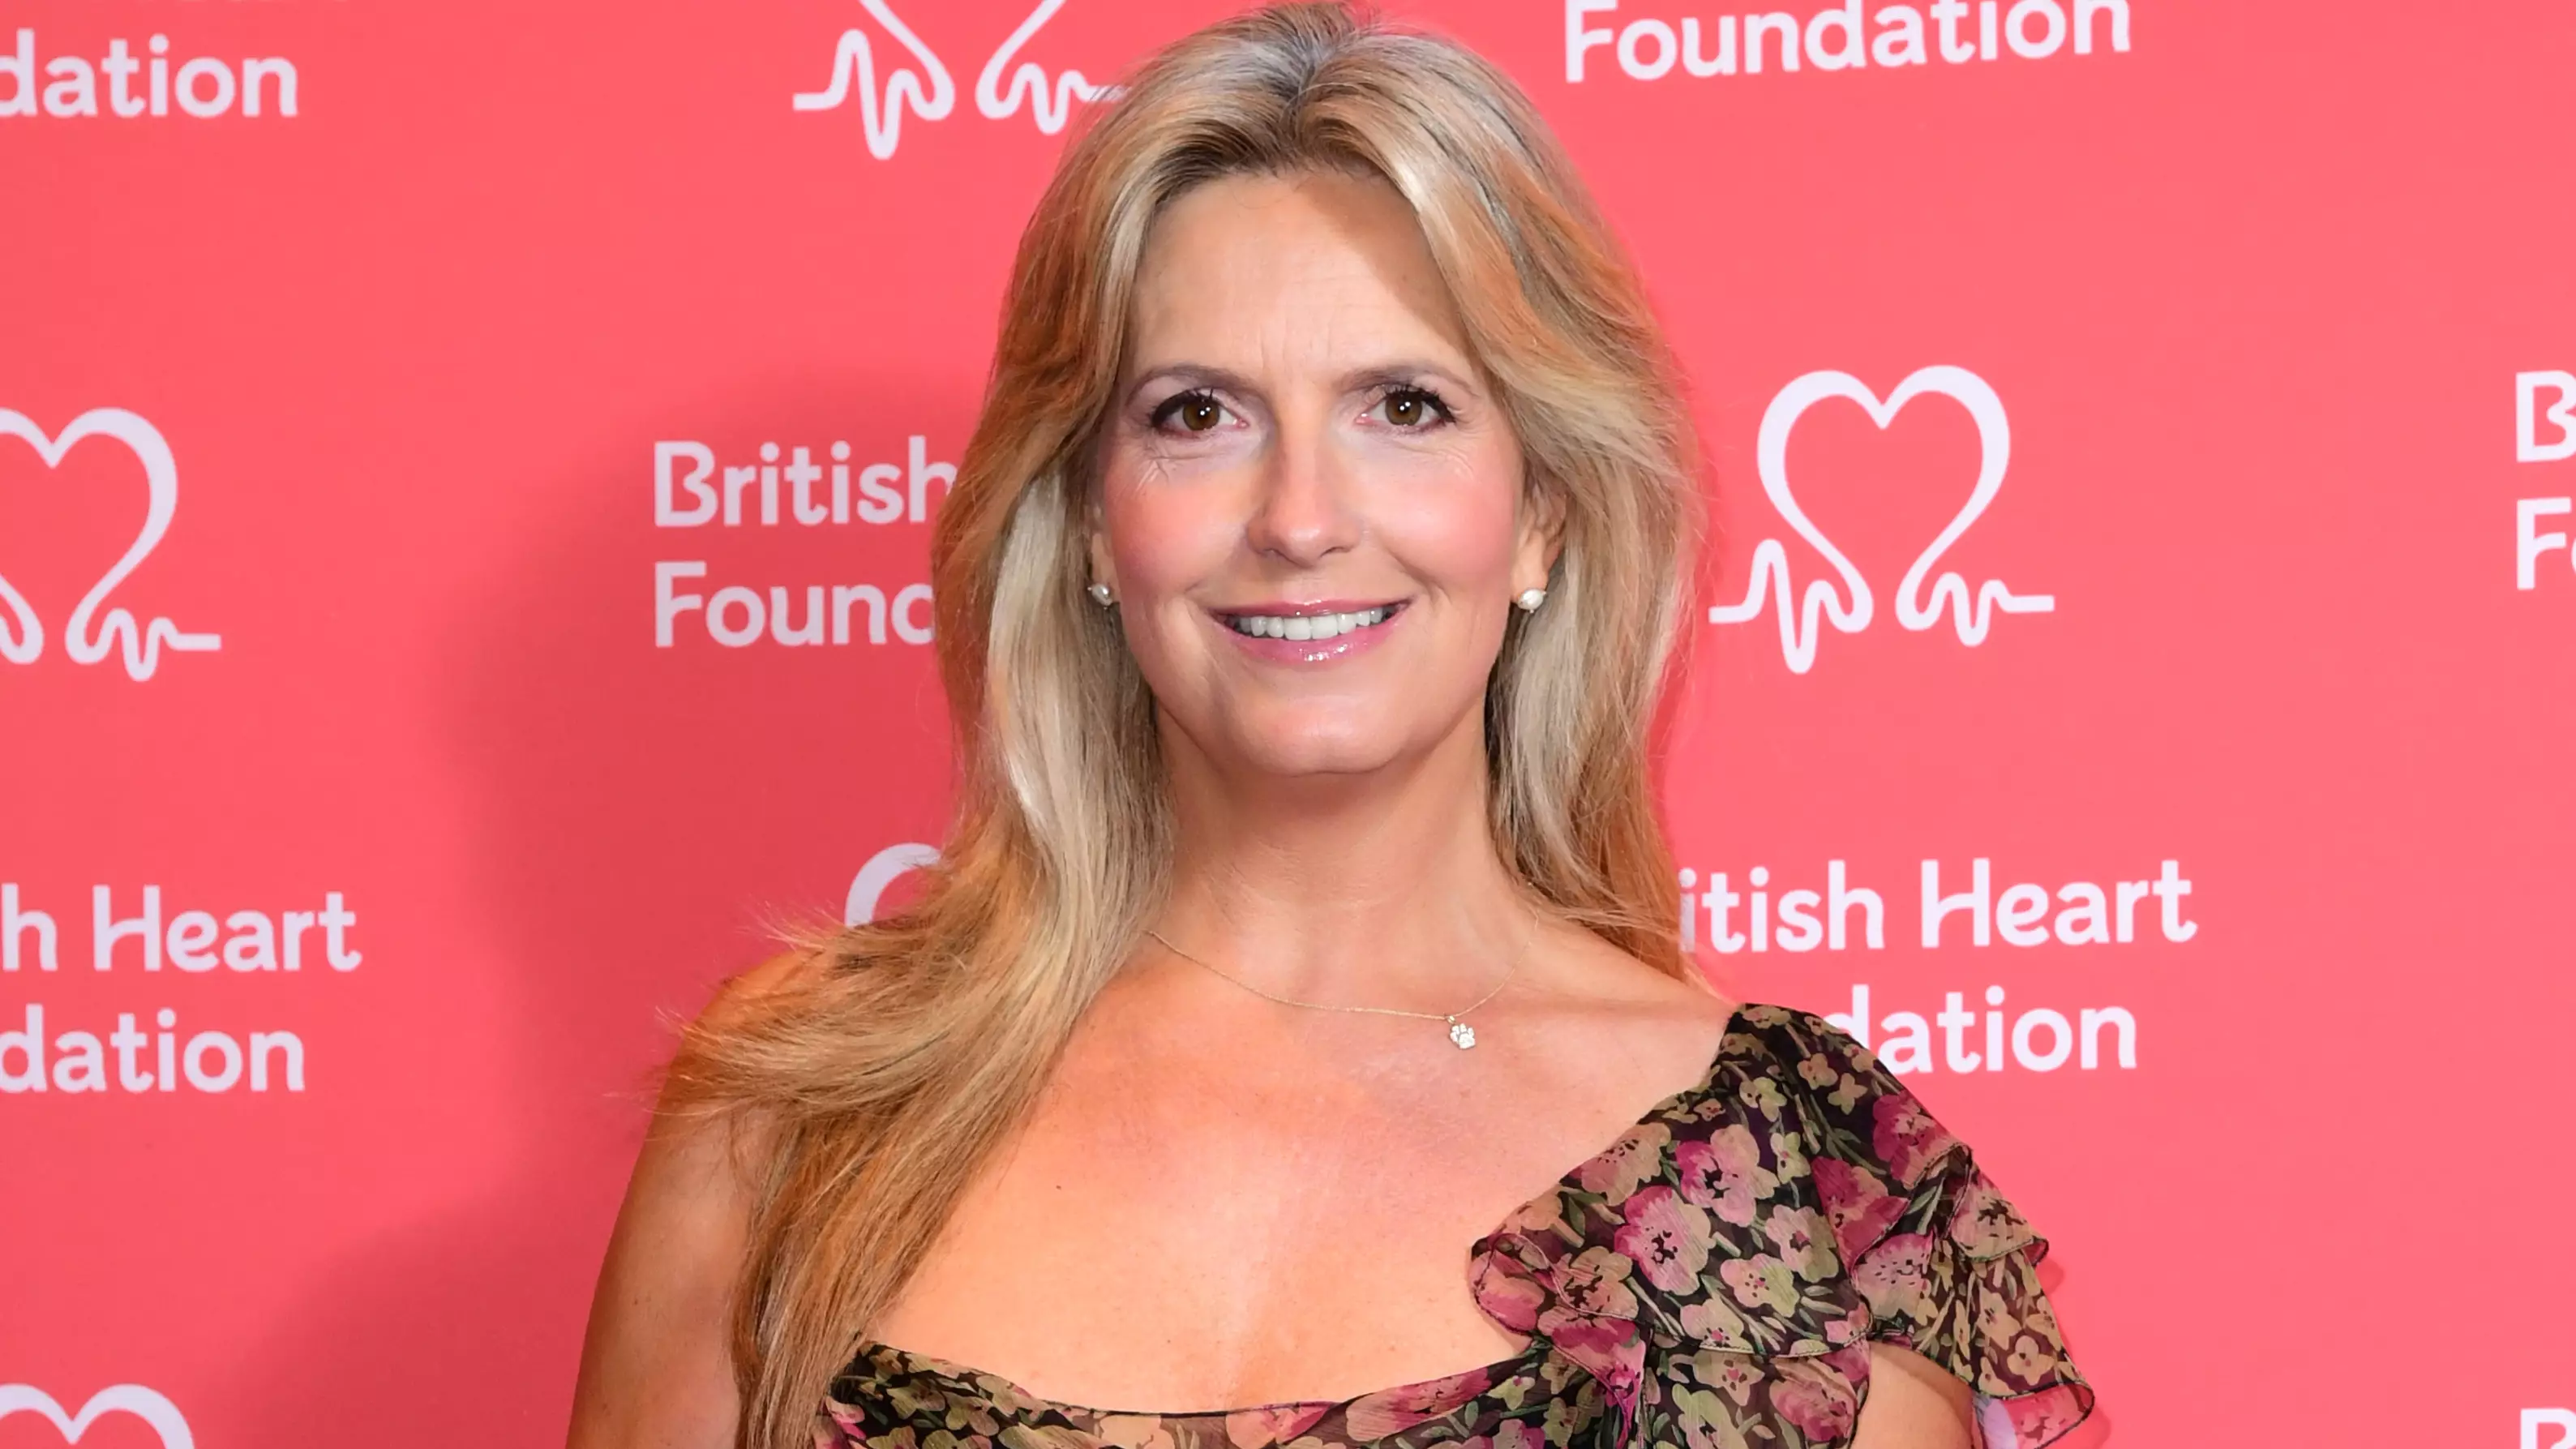 Who Is Penny Lancaster Married To?